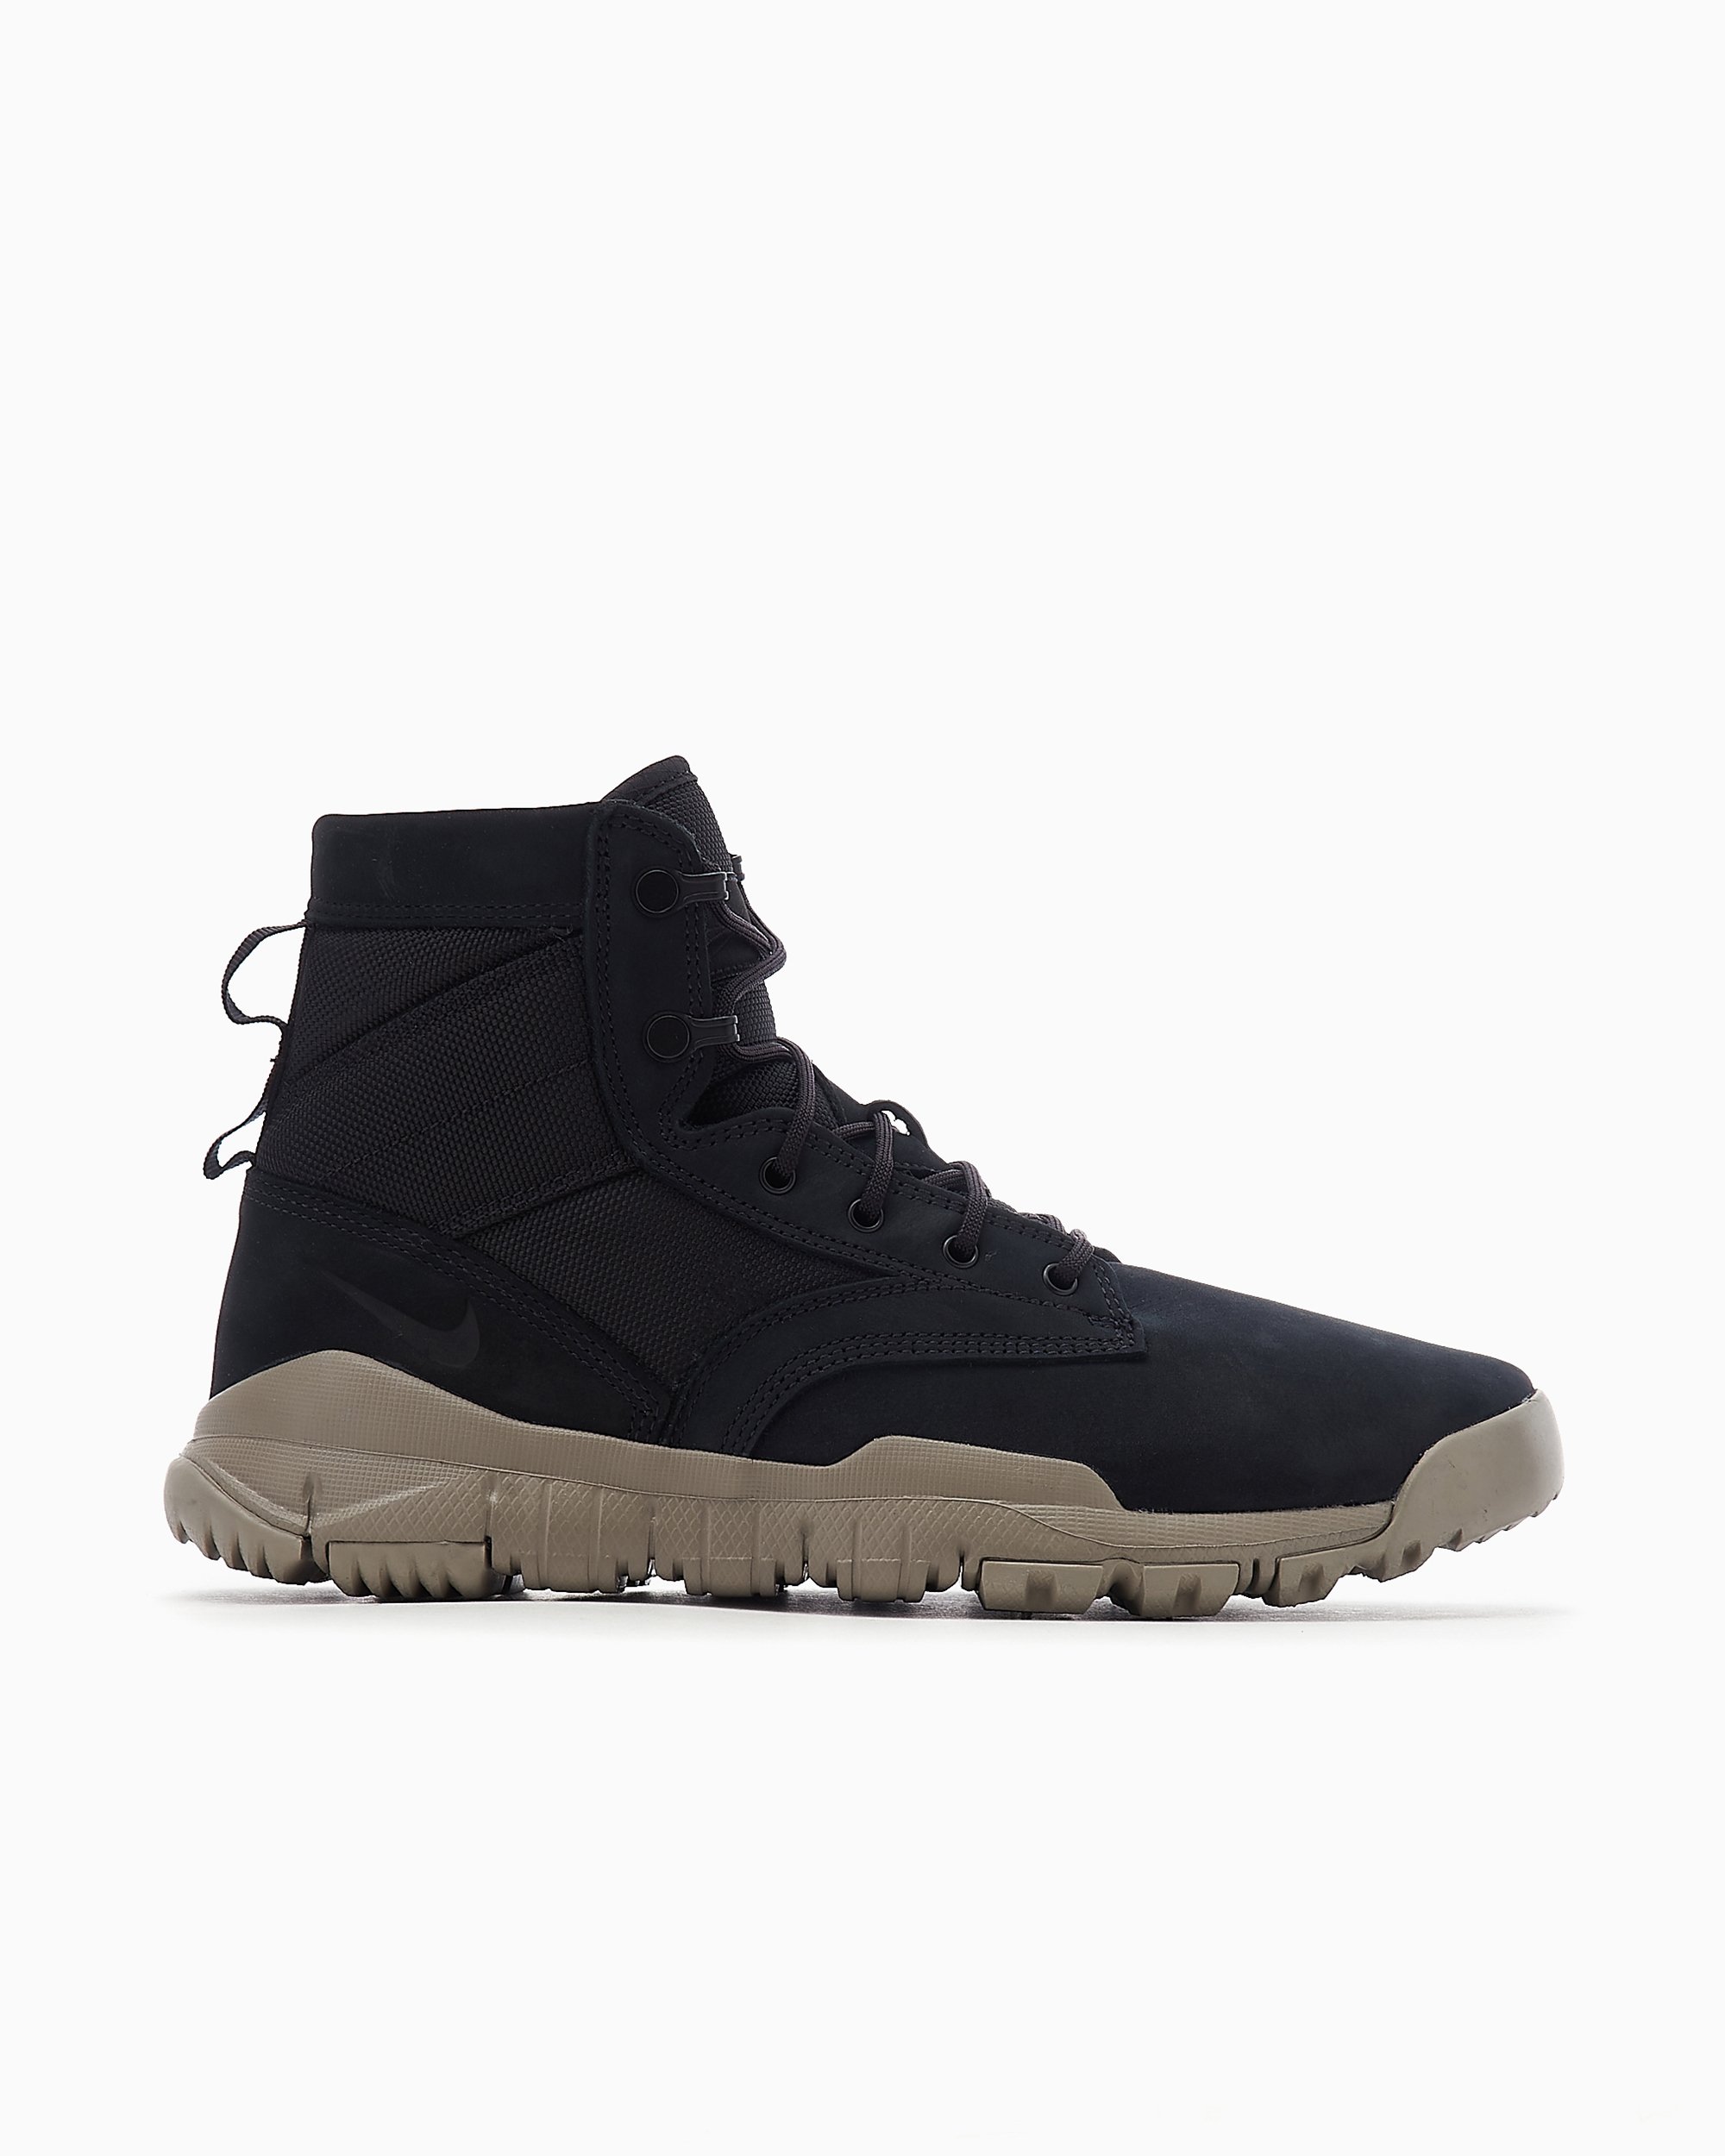 Nike SFB 6" Leather Boot Black 862507-002| at FOOTDISTRICT